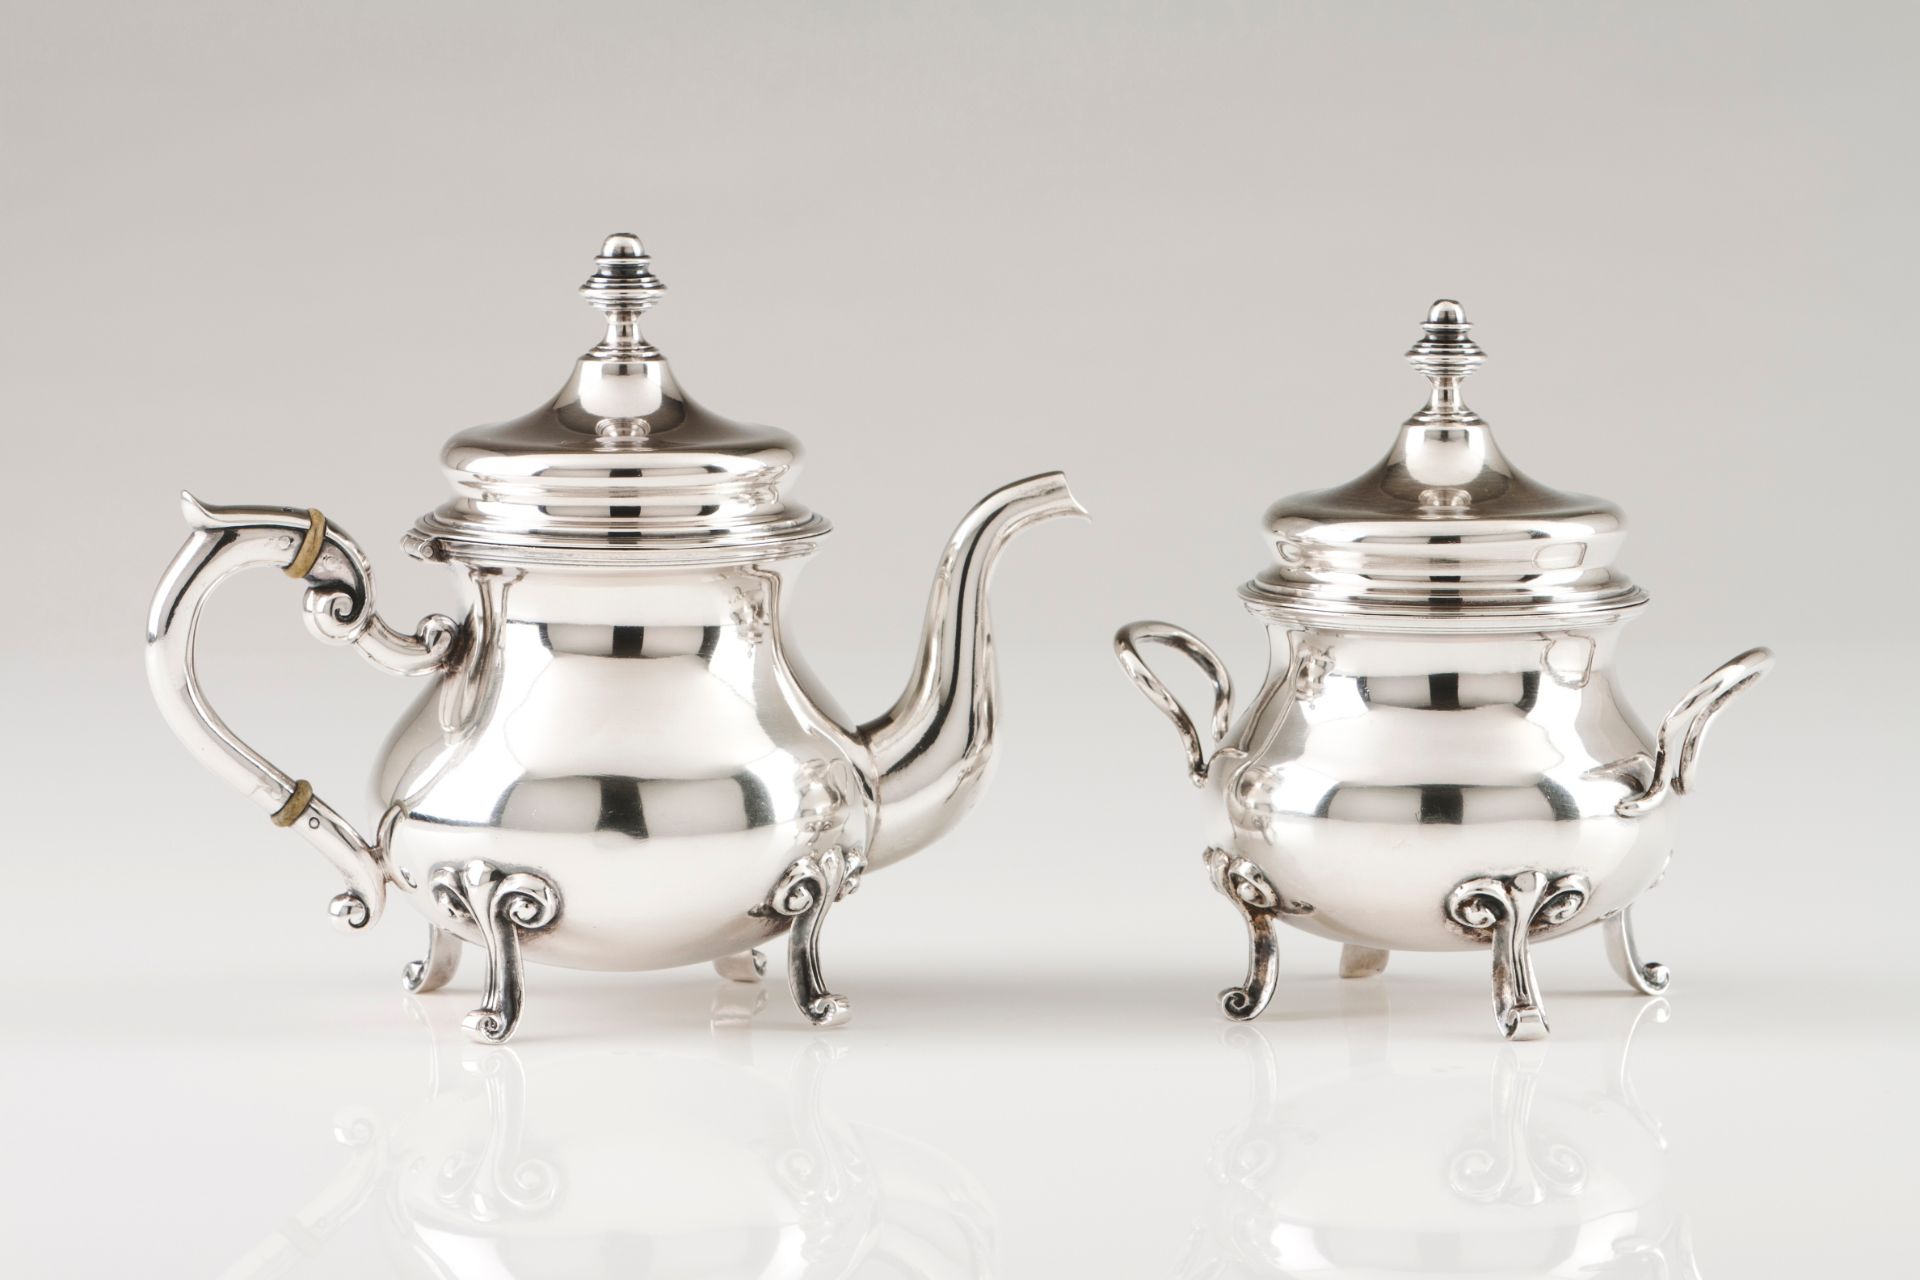 A small teapot and sugar bowlPortuguese silver Plain body on four scroll feet and volute handles